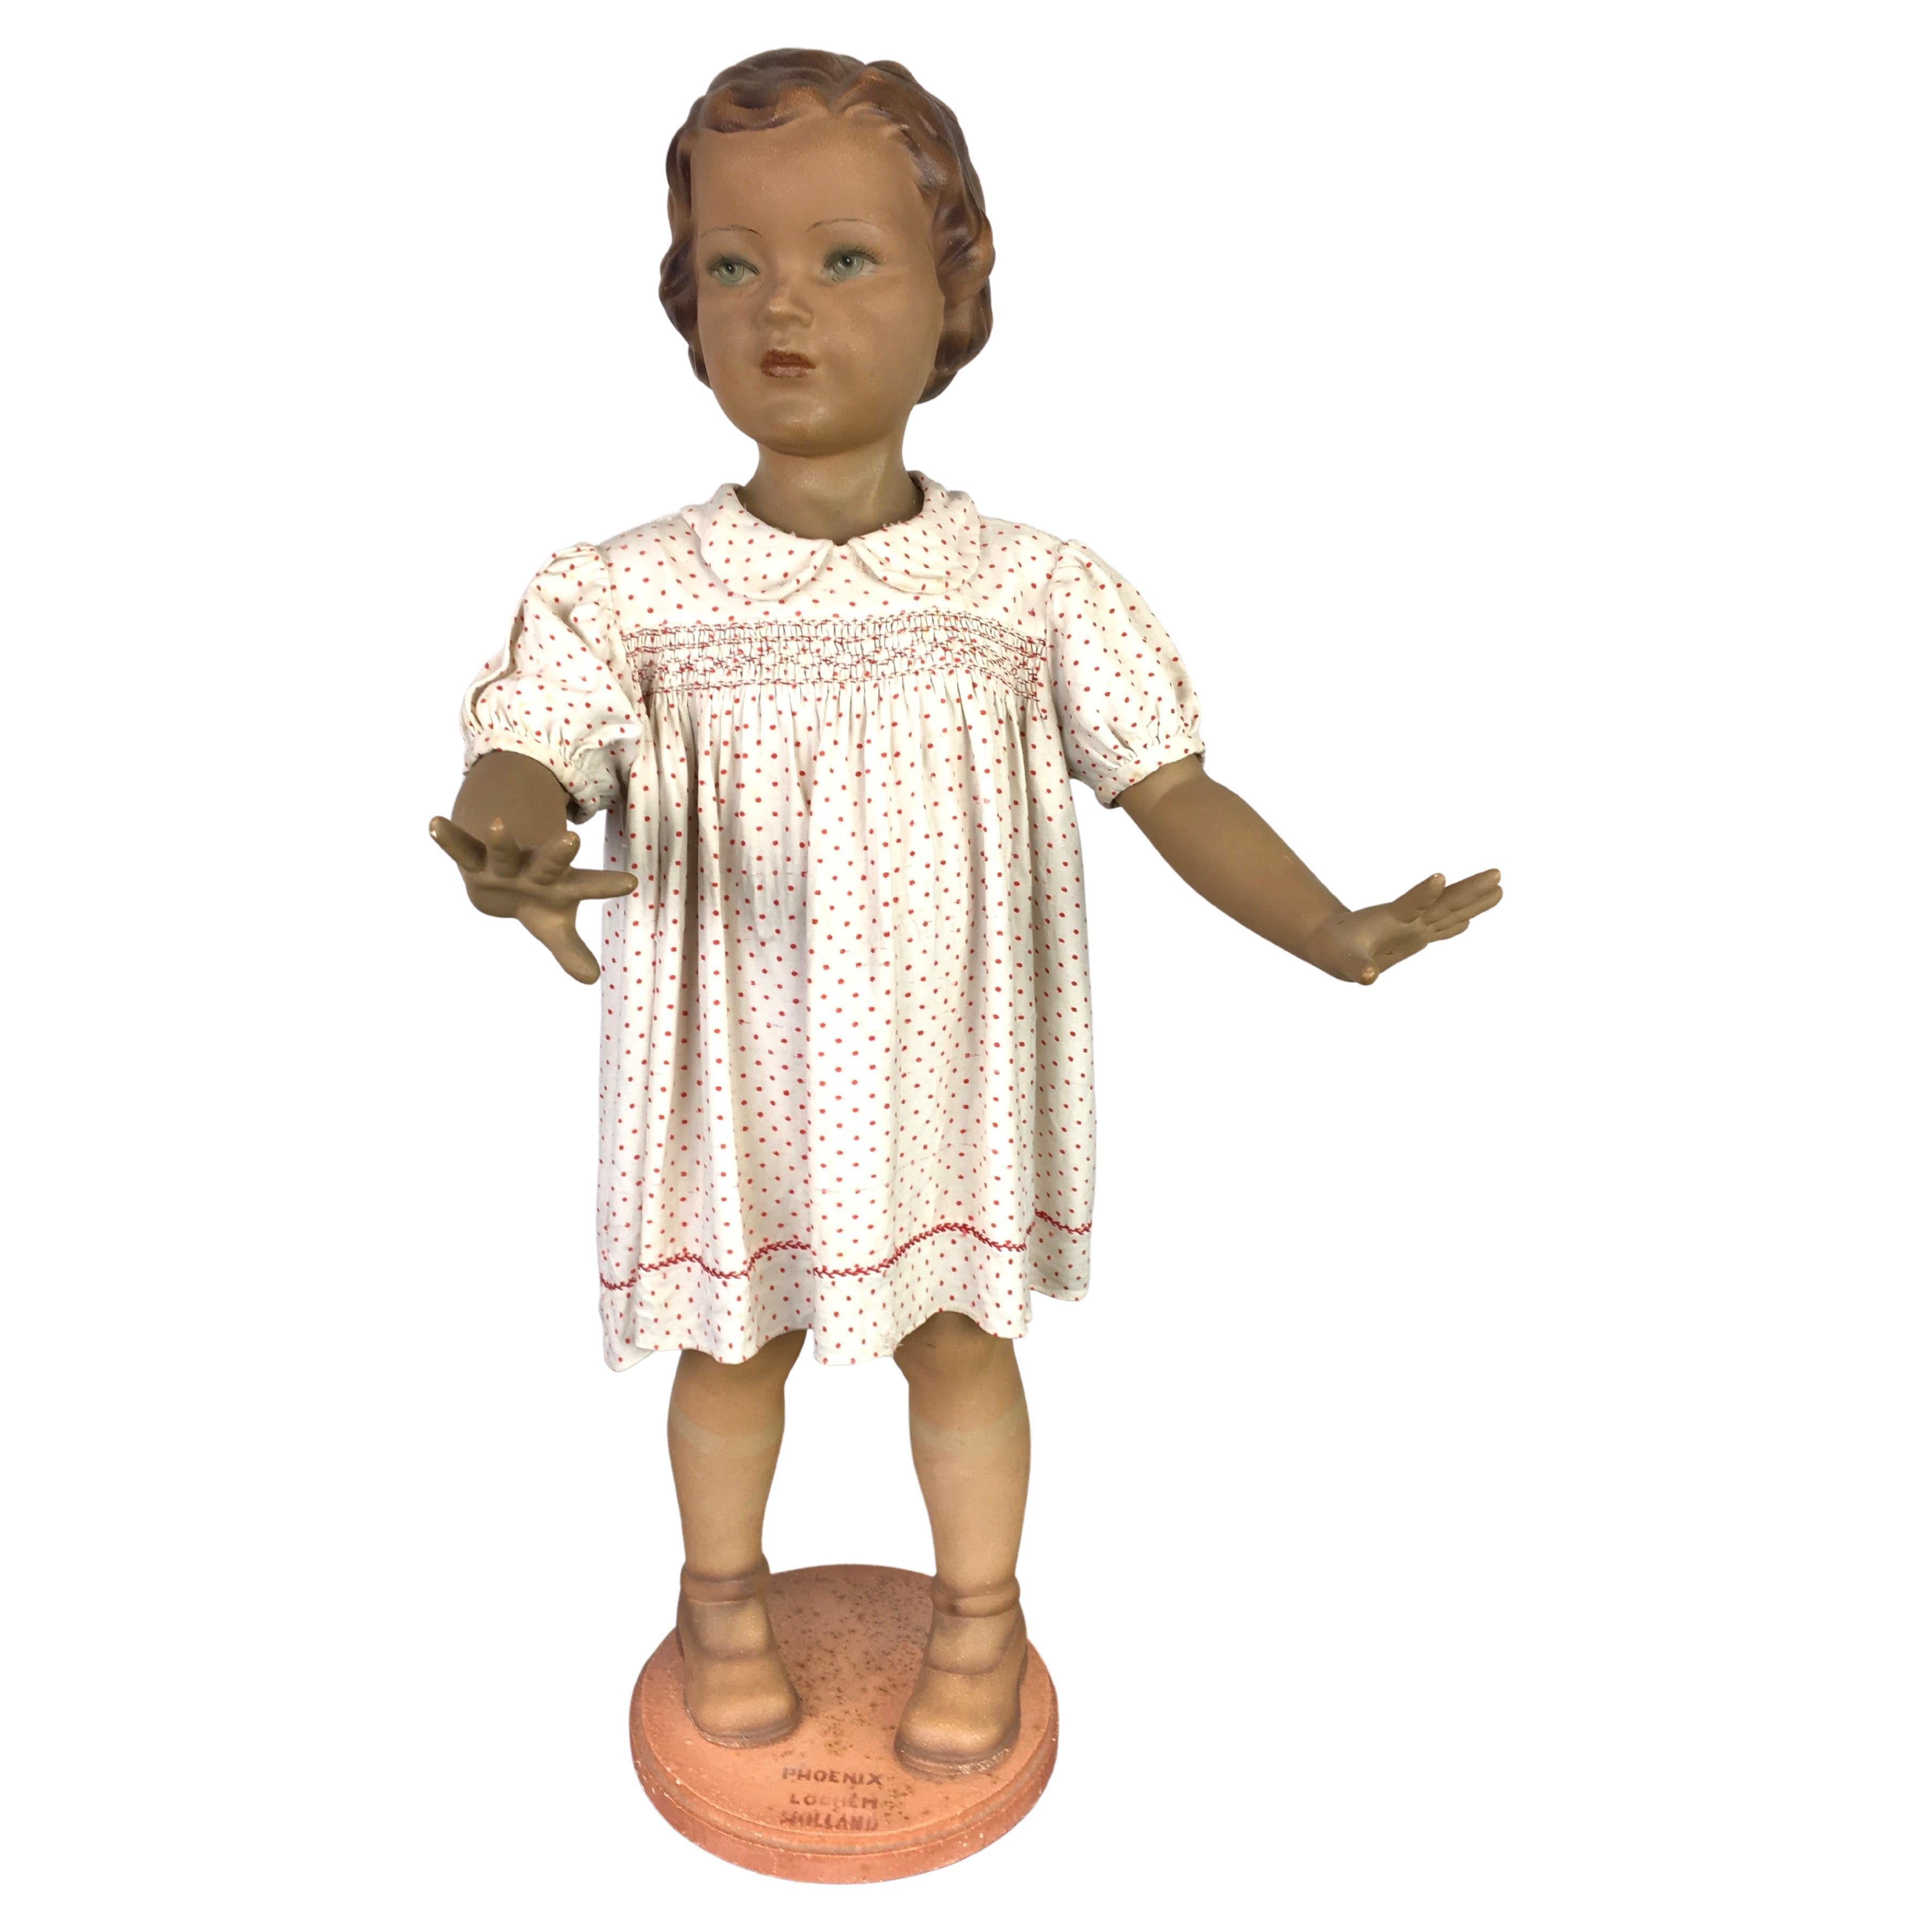 Art Deco Store Display Doll, Child Mannequin